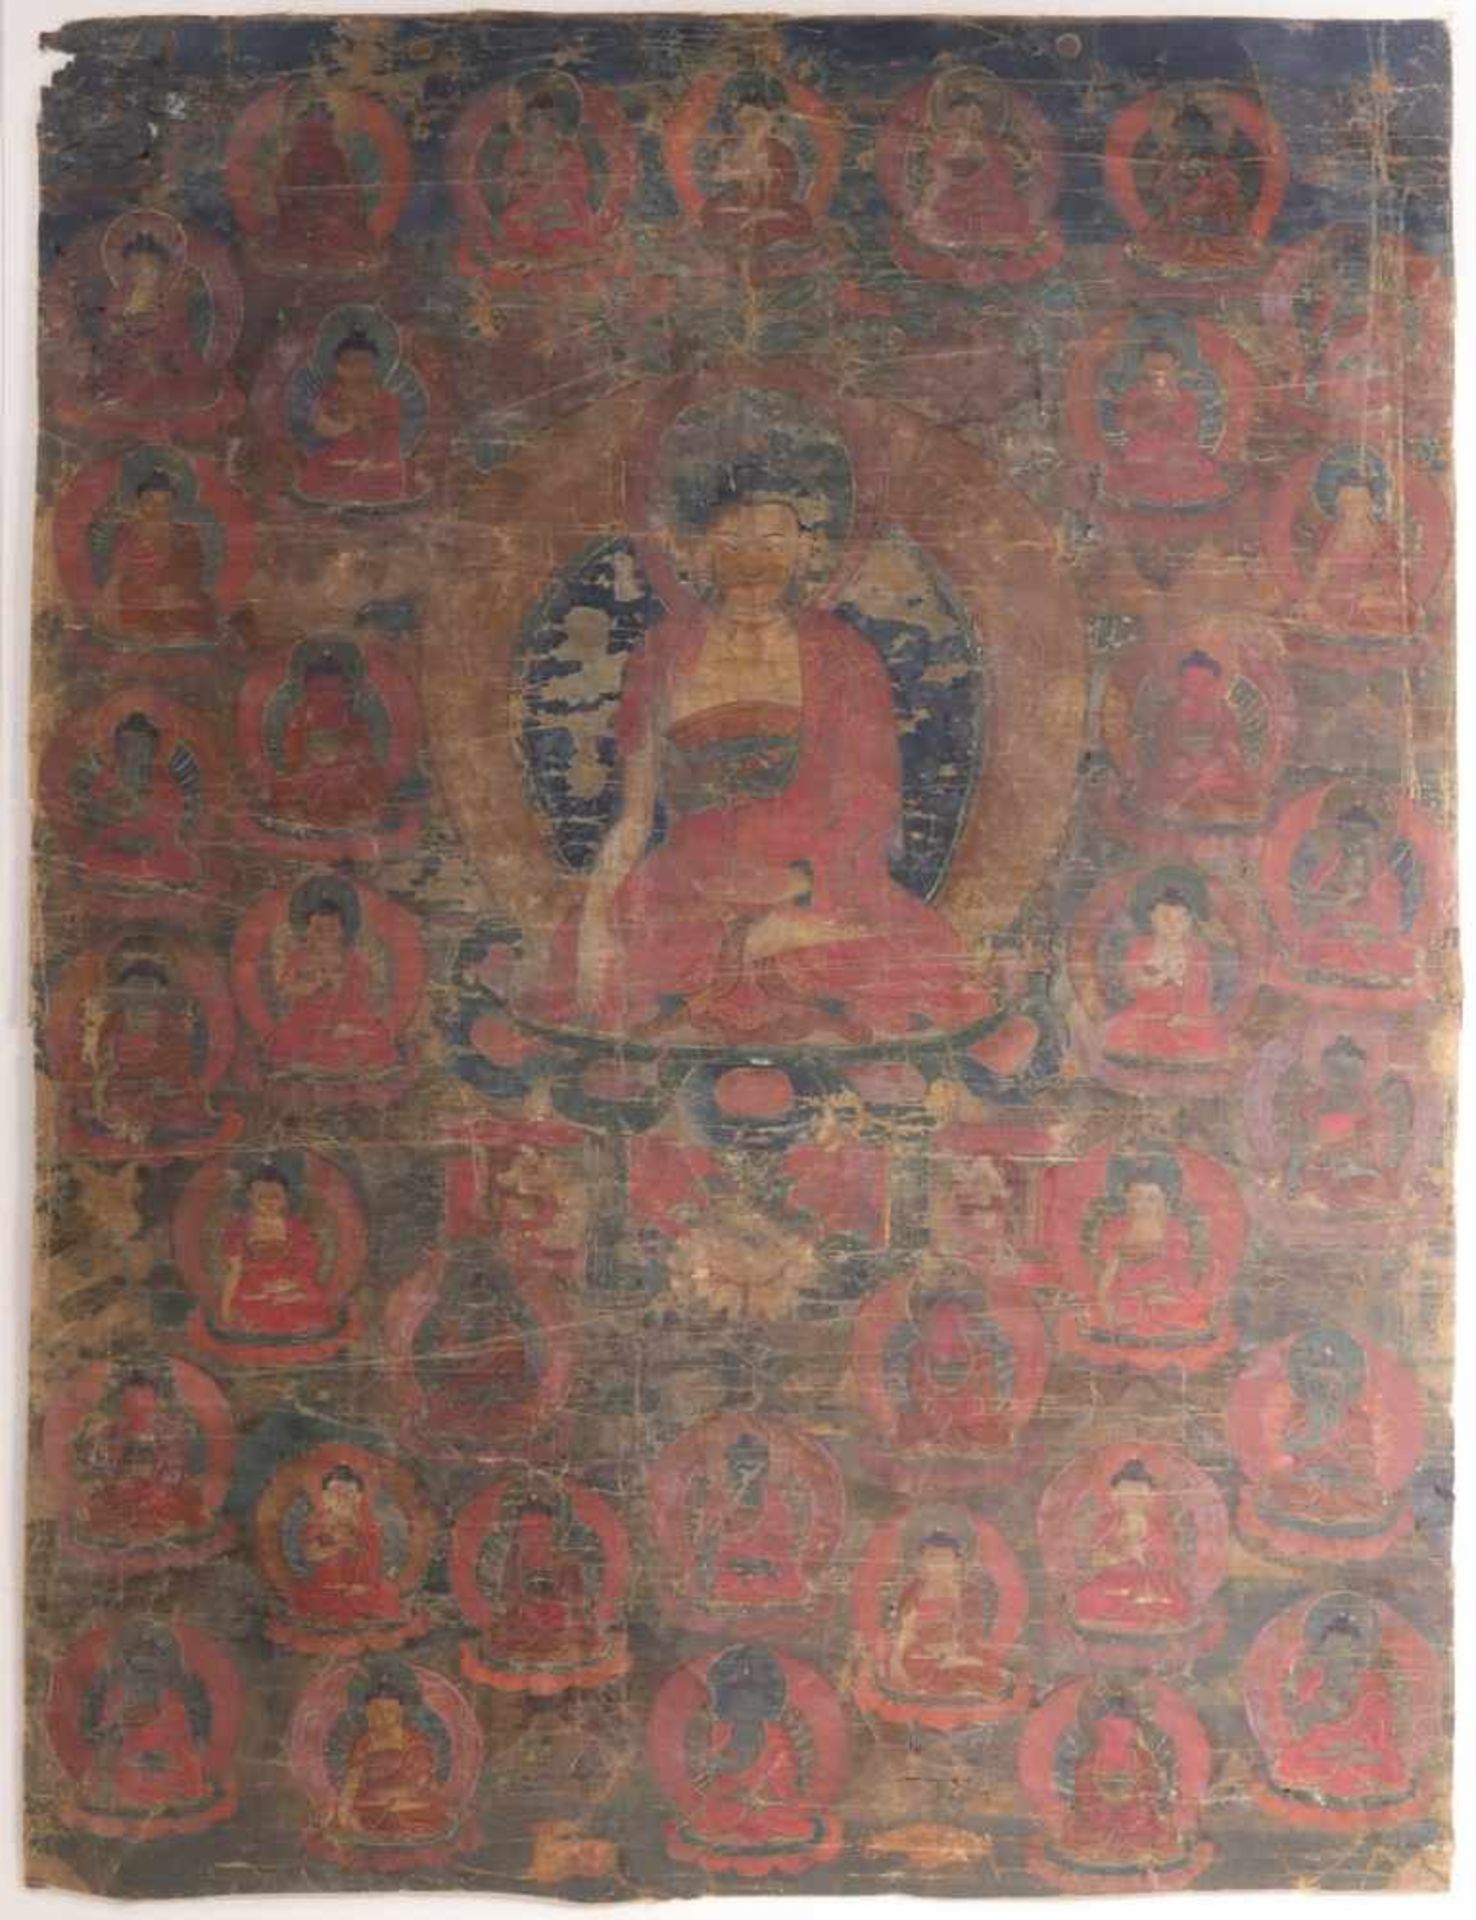 THANGKA DEPICTING BUDDHAMineral pigments on cotton,Tibet, 18th centuryDimensions Painting: Height 65